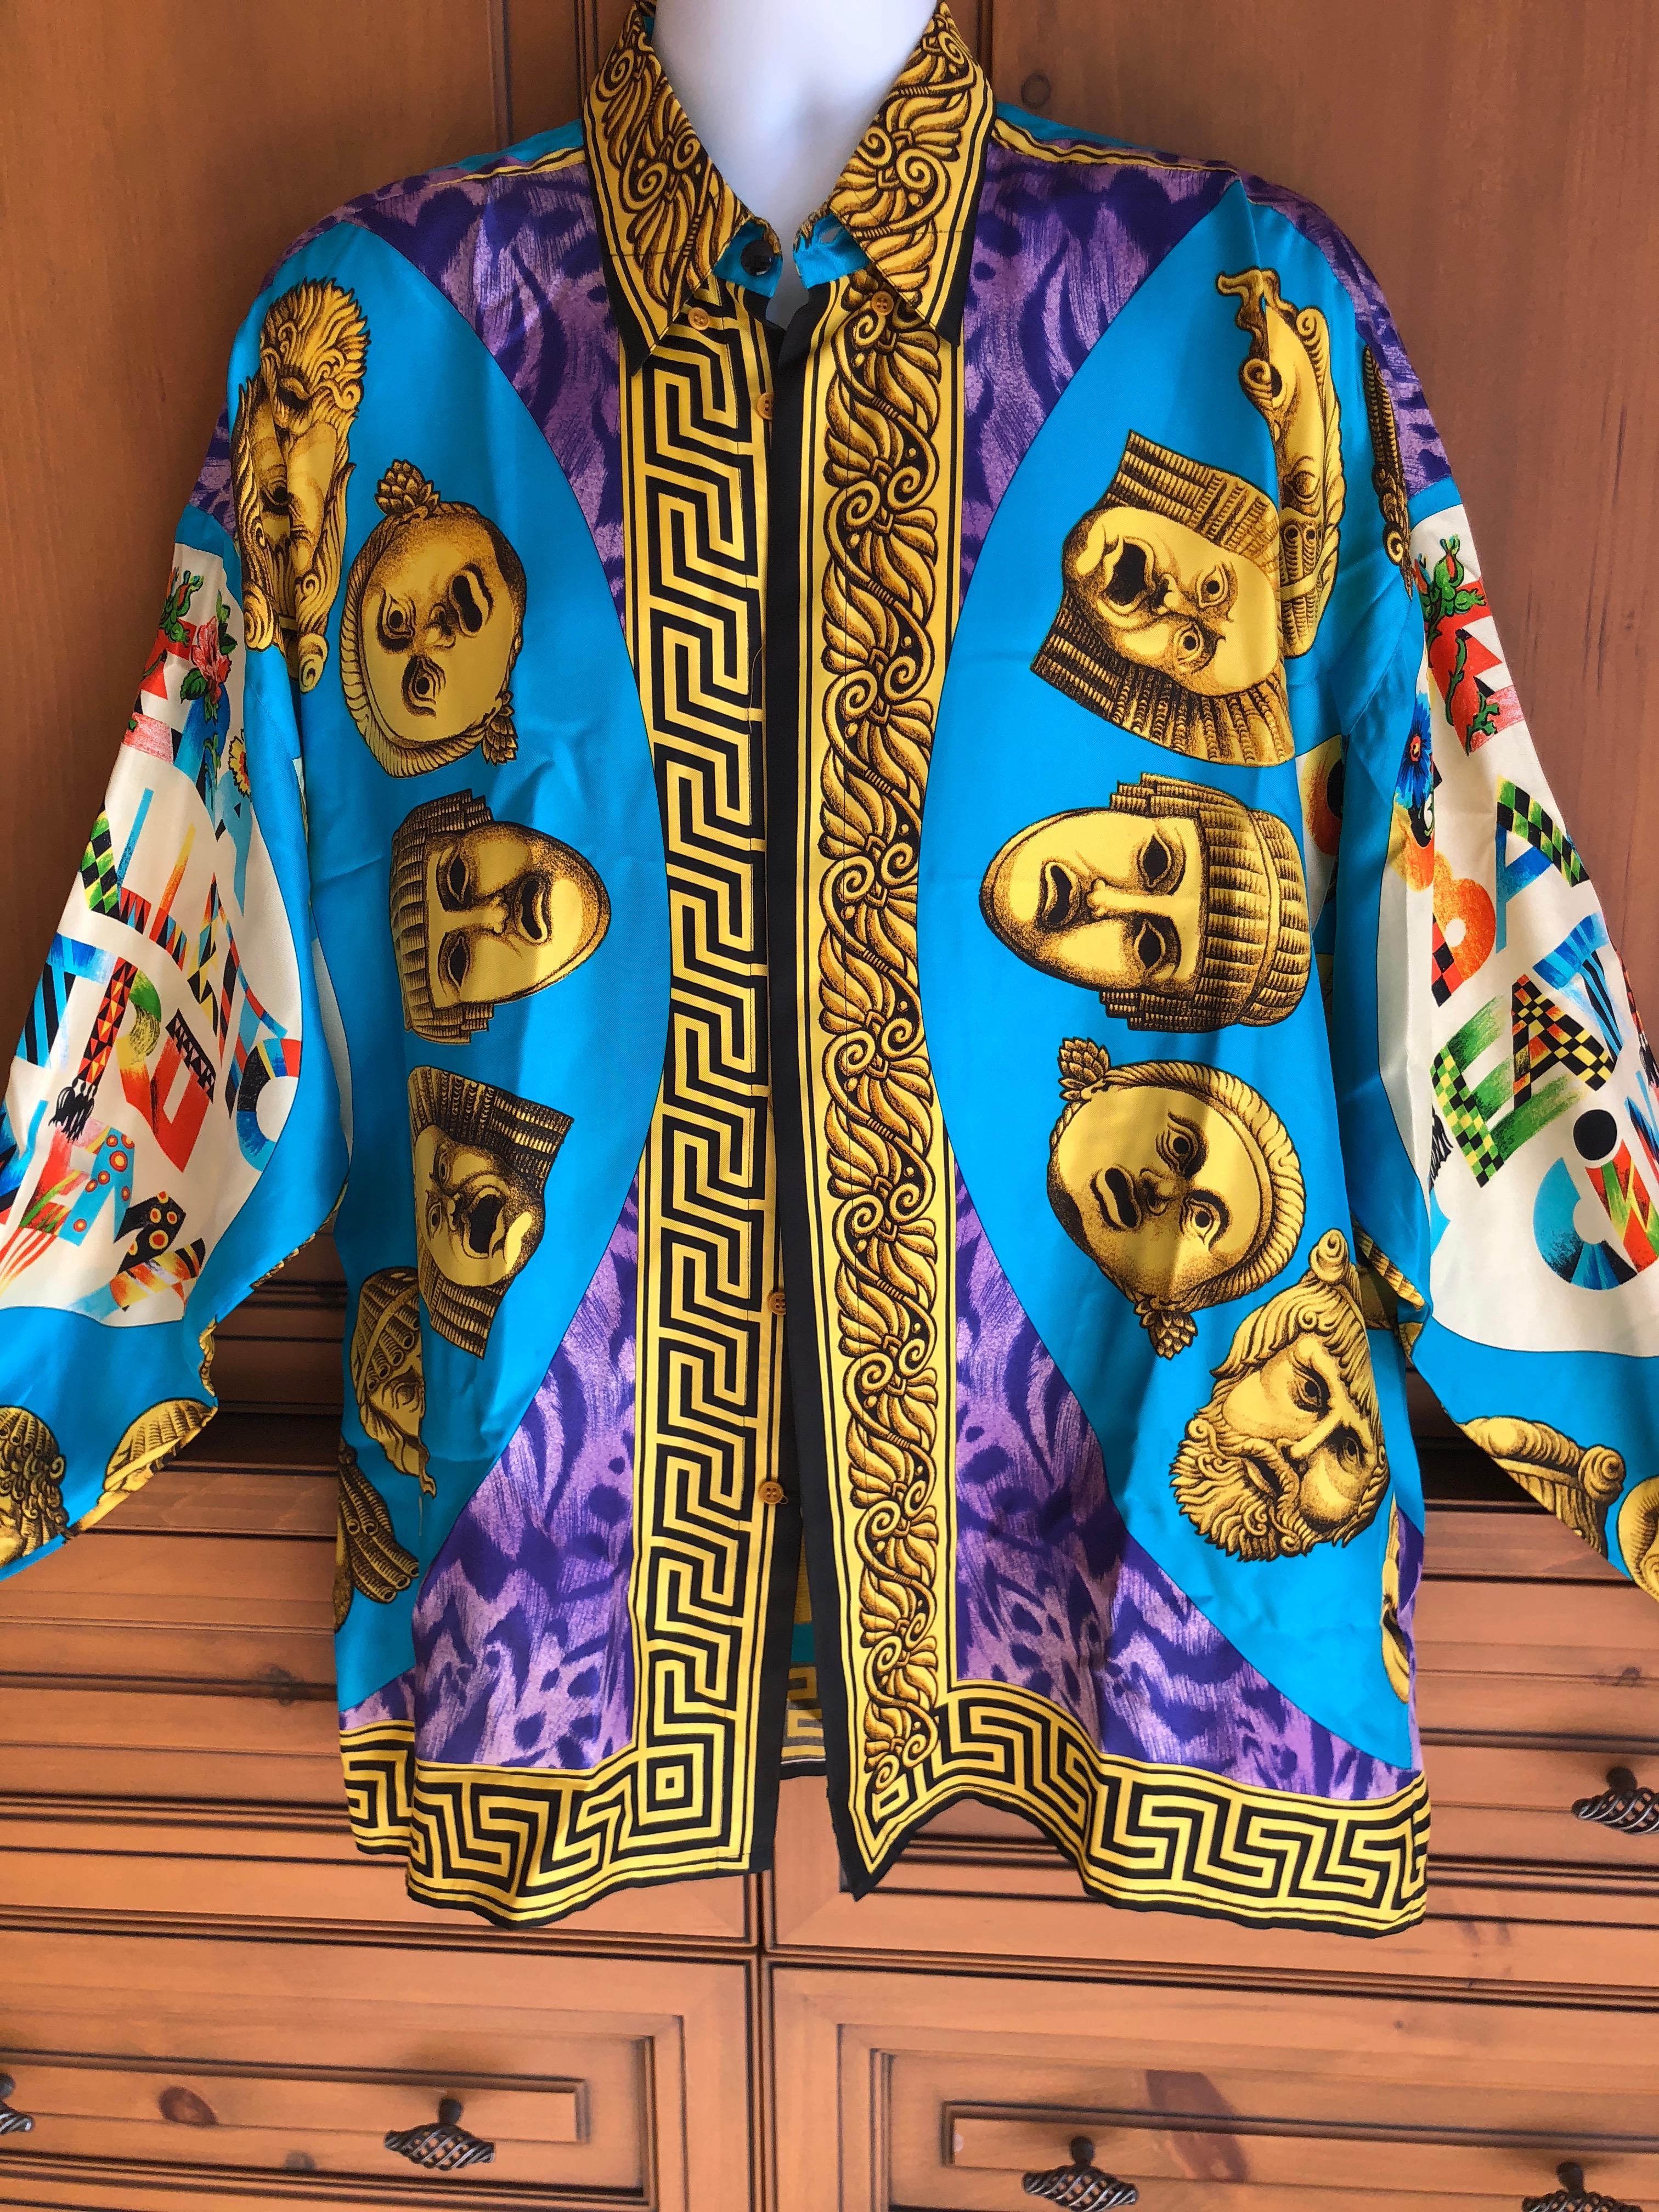 Gianni Versace Couture Opera Balleto Teatro Cinema Men’s Silk Shirt
Pristine Condition
This is such a beautiful piece a classic. Original buttons are intact.
Marked size 52, but runs very large, more like XXL
Measurements ;
Chest 58